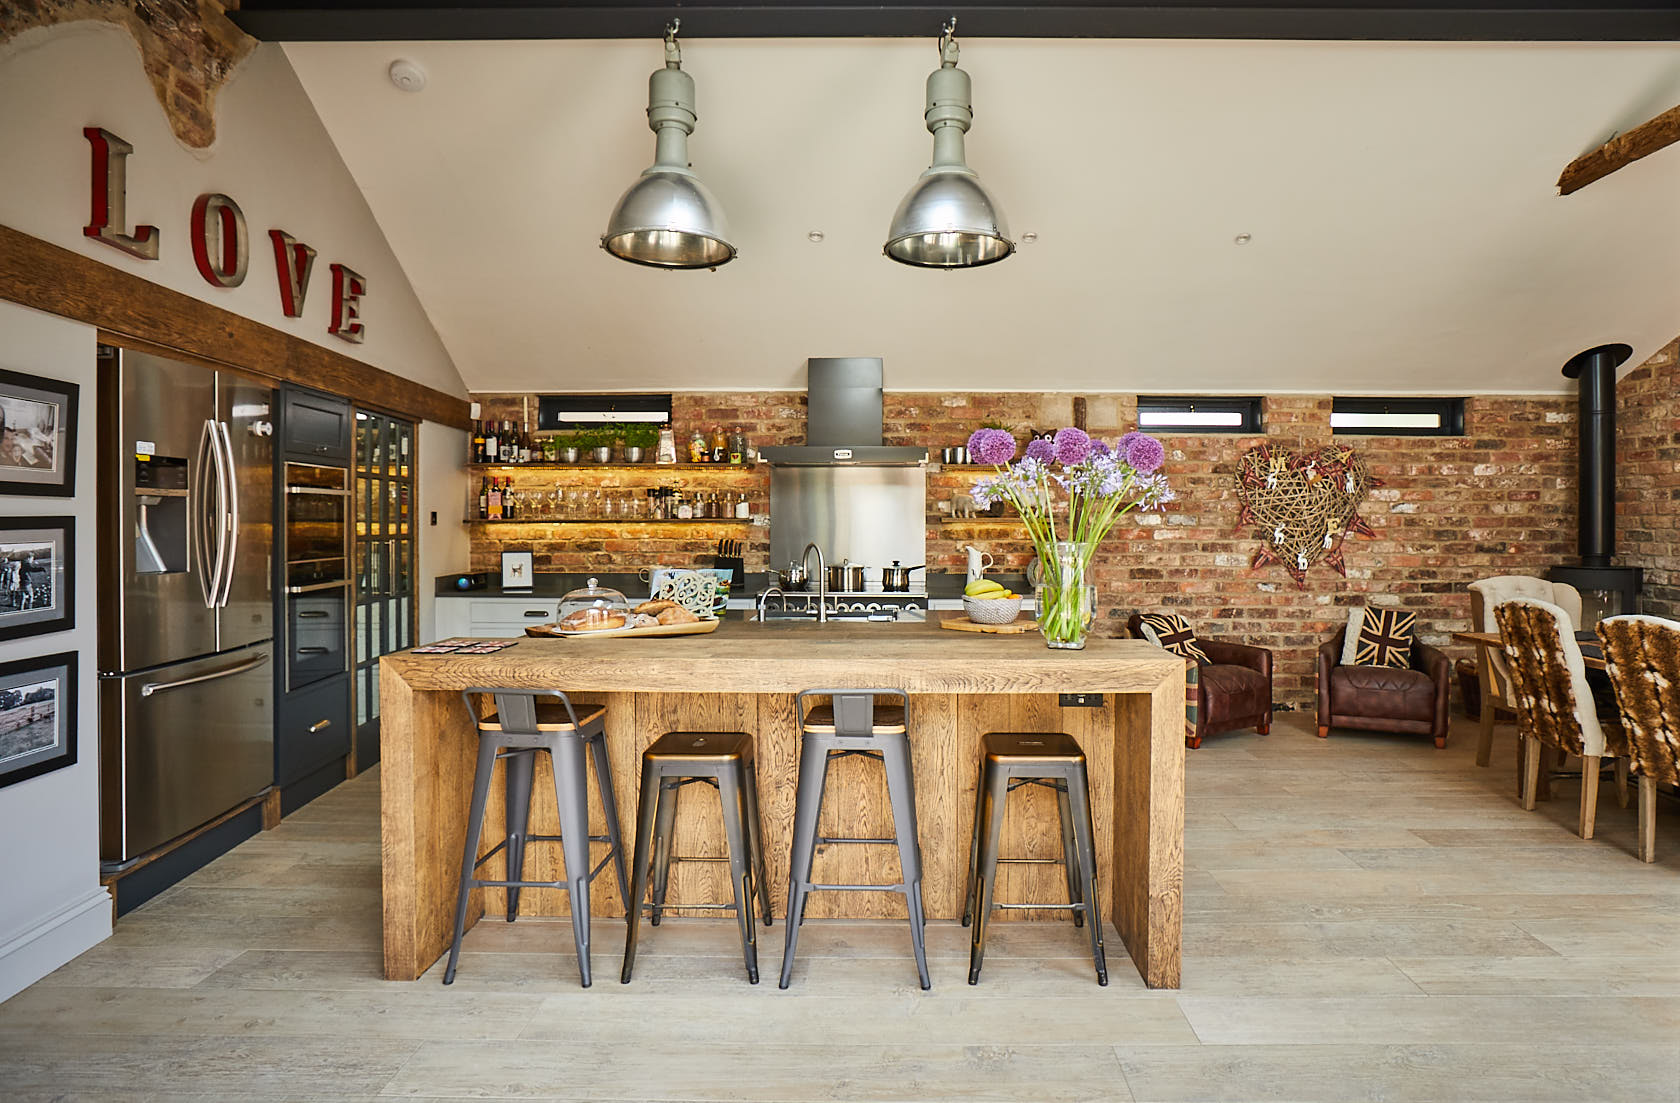 Large reclaimed pig lamps shine on engineered oak hand aged breakfast bar and stools